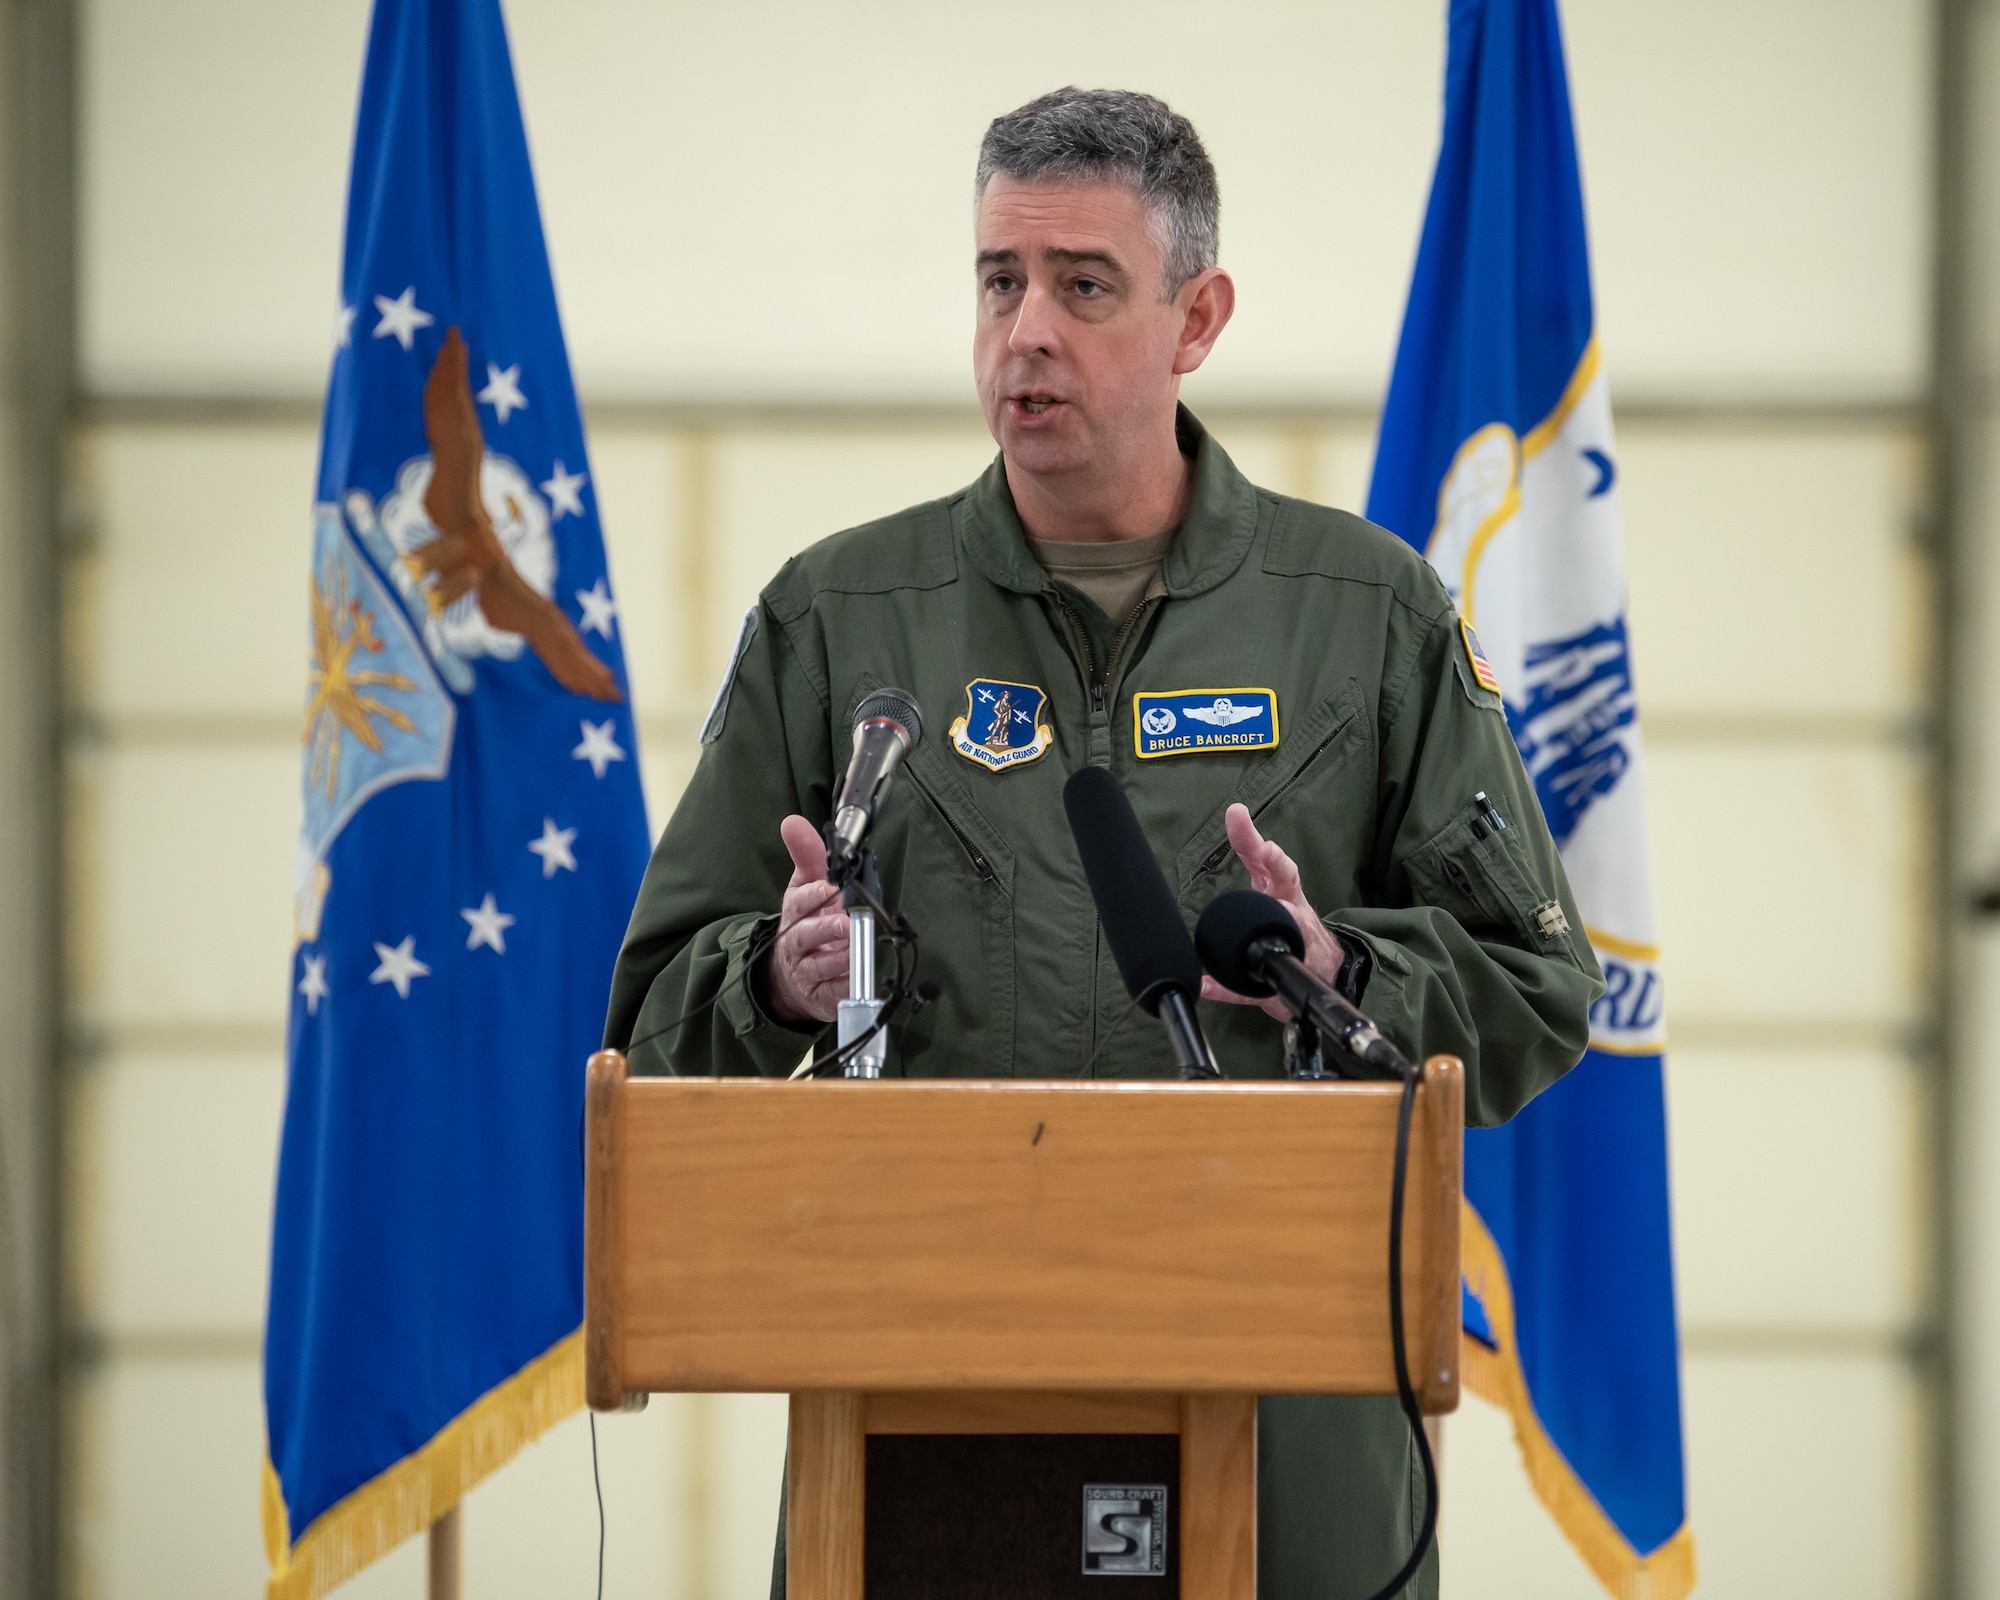 Col. Bruce Bancroft, commander of the 123rd Airlift Wing, speaks to audience members during a ceremony at the Kentucky Air National Guard Base in Louisville, Ky., Nov. 6, 2021, to welcome the arrival of two new C-130J Super Hercules aircraft. The state-of-the-art transports are among eight that the wing will receive over the next 11 months to replace eight aging C-130 H-model aircraft, which entered service in 1992 and have seen duty all over the world. (U.S. Air National Guard photo by Dale Greer)